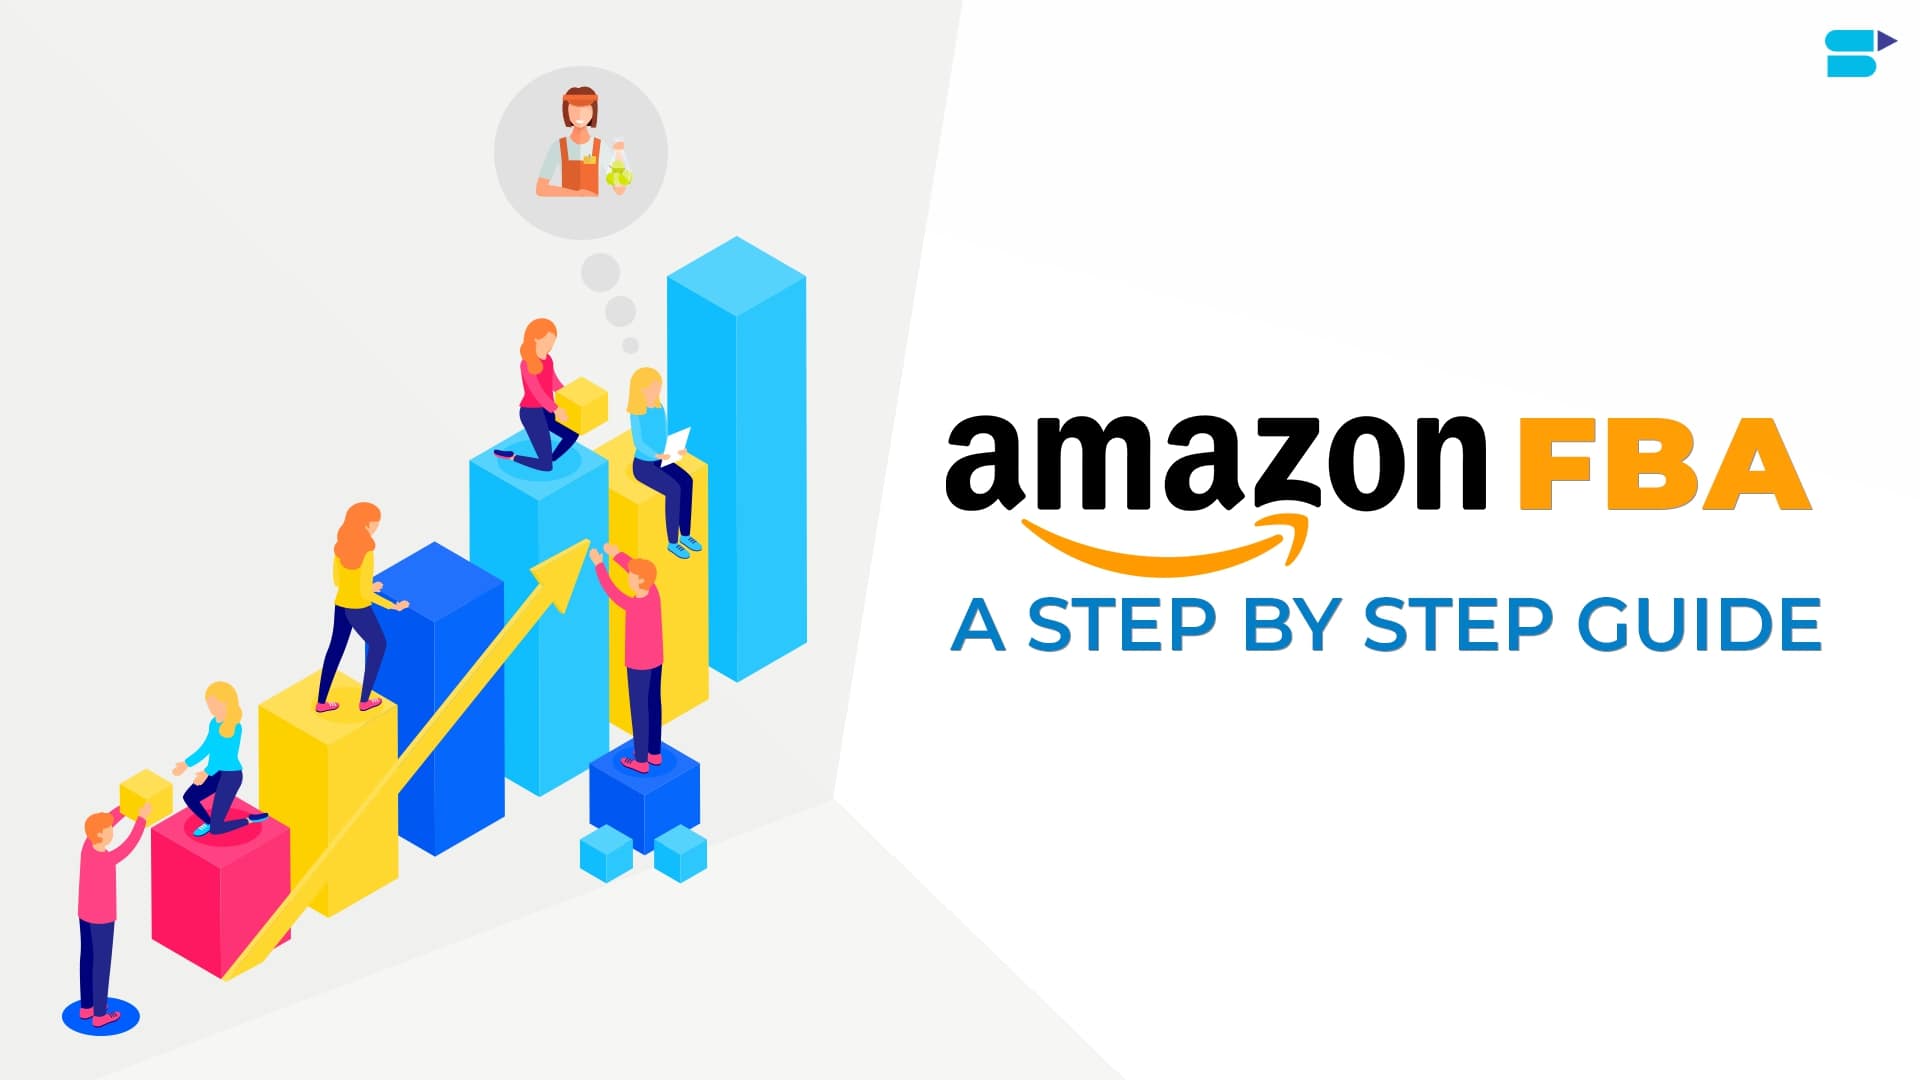 How to Start Selling on Amazon FBA - Complete Guide 2020